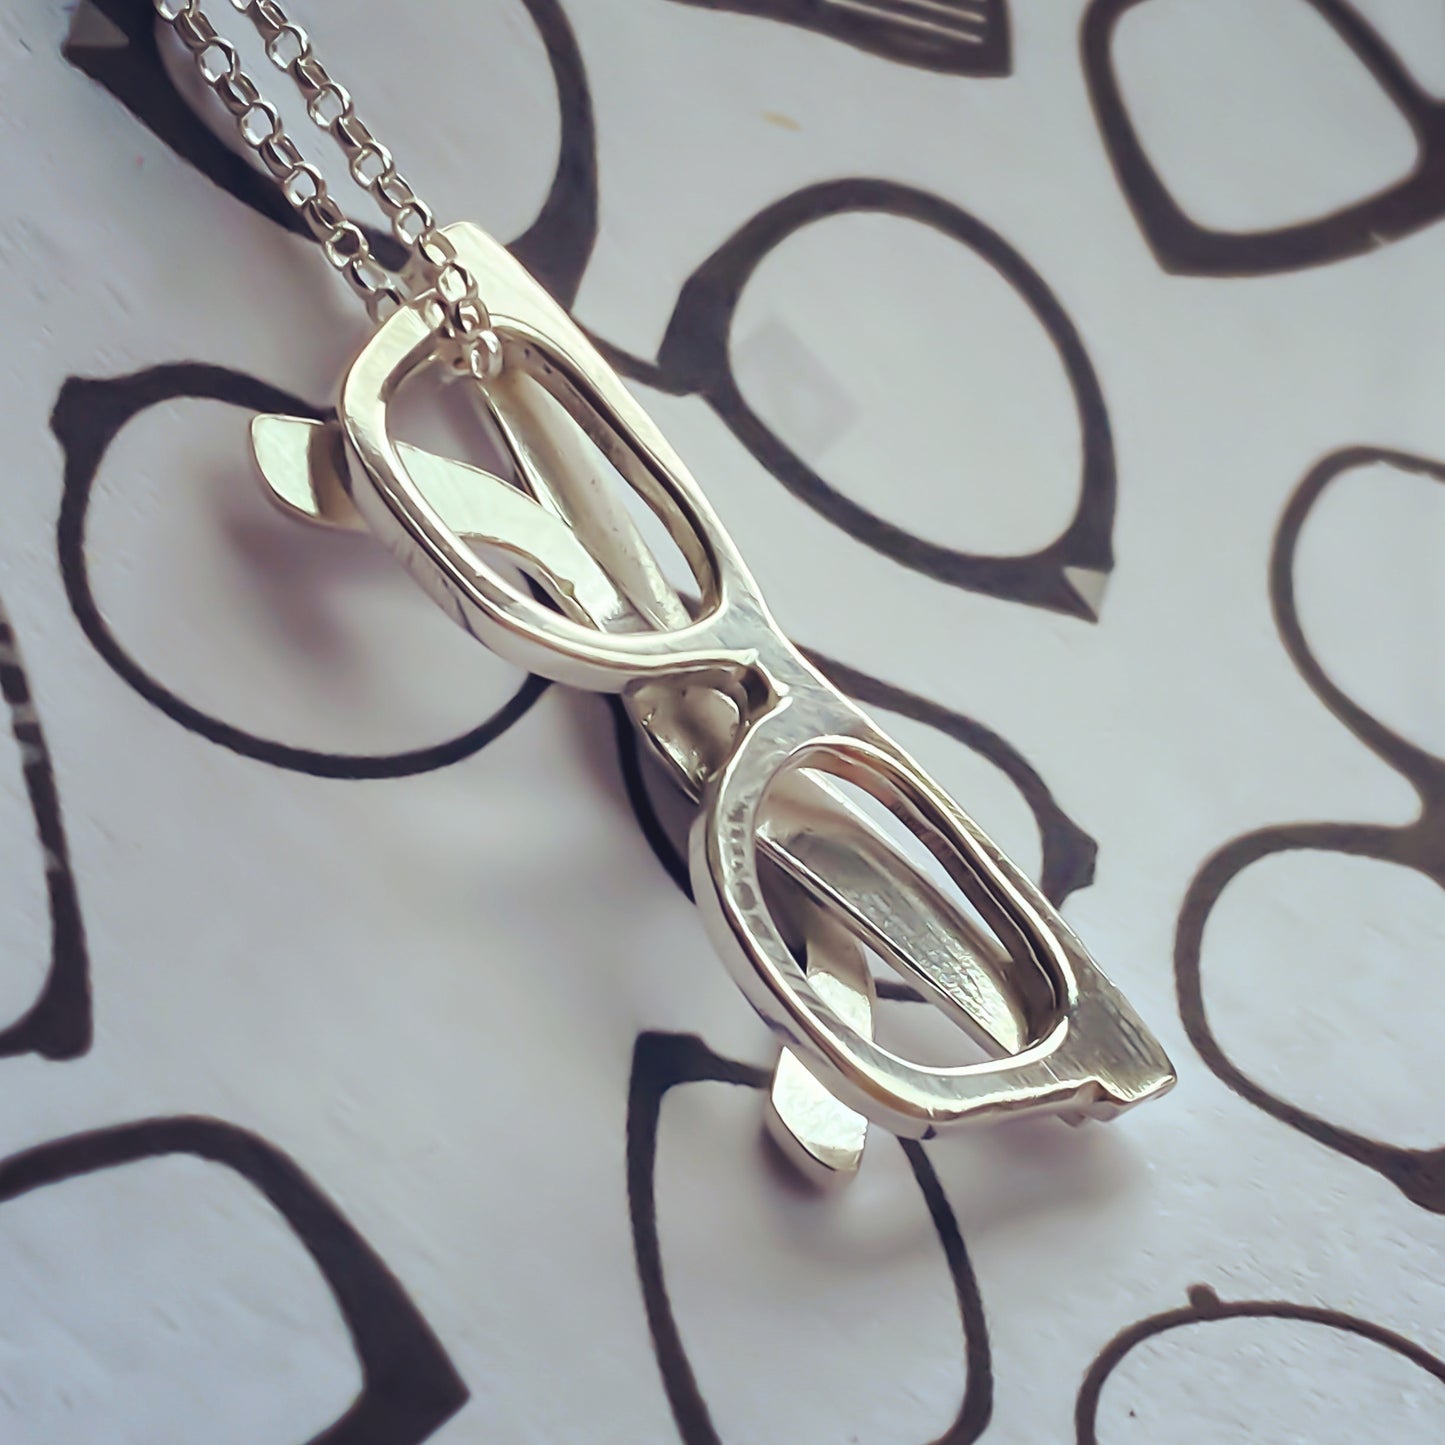 Solid silver spectacles pendant - necklace